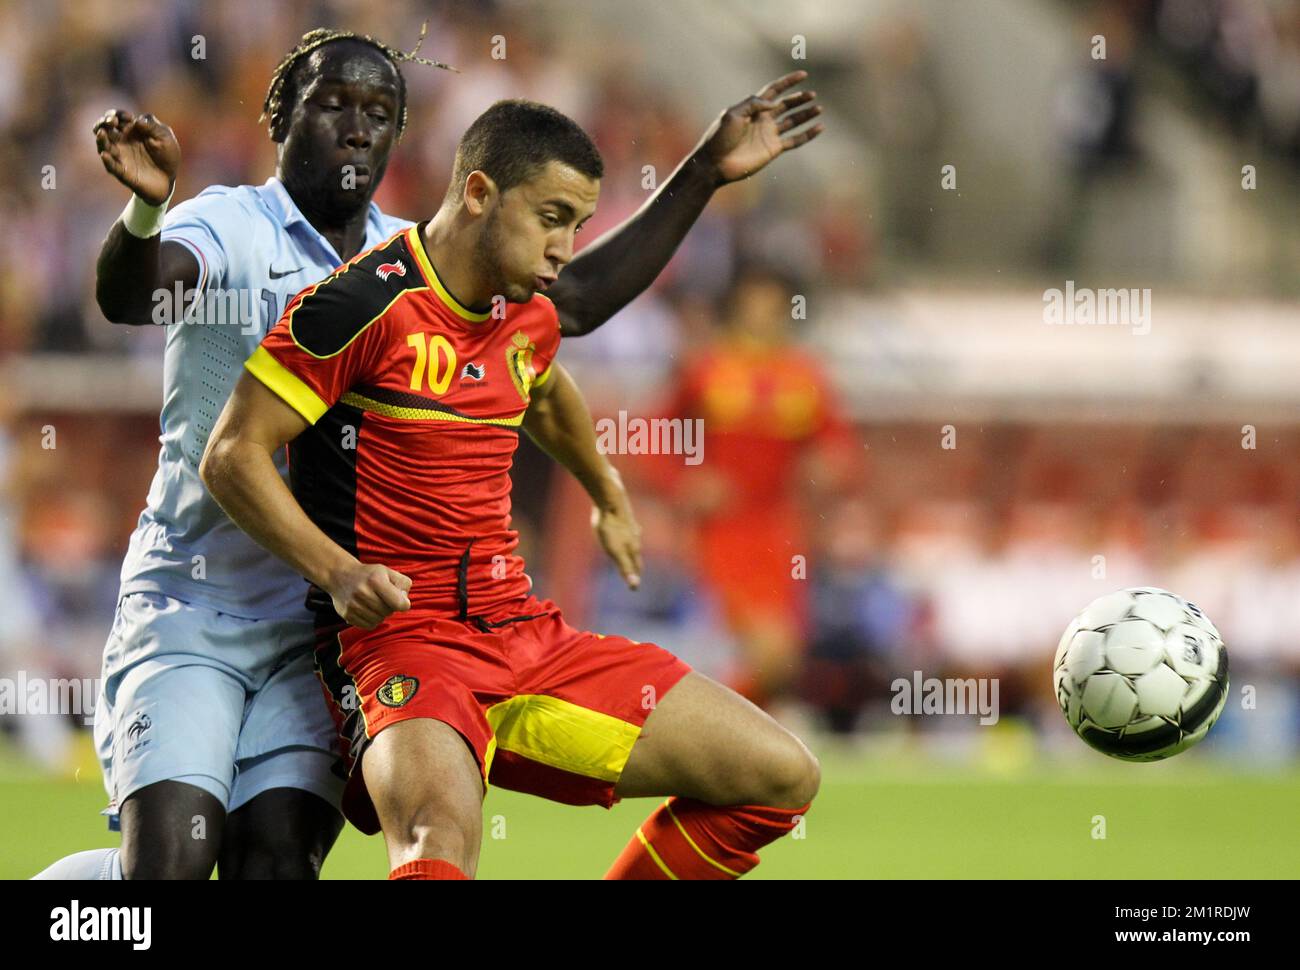 French Bacary Sagna and Belgium's Eden Hazard fight for the ball during a friendly game of the Belgian national soccer team Red Devils against France's national soccer team, Wednesday 14 August 2013, in the King Baudouin Stadium (Stade Roi Baudouin/Koning Boudewijnstadion), in Brussels.  Stock Photo